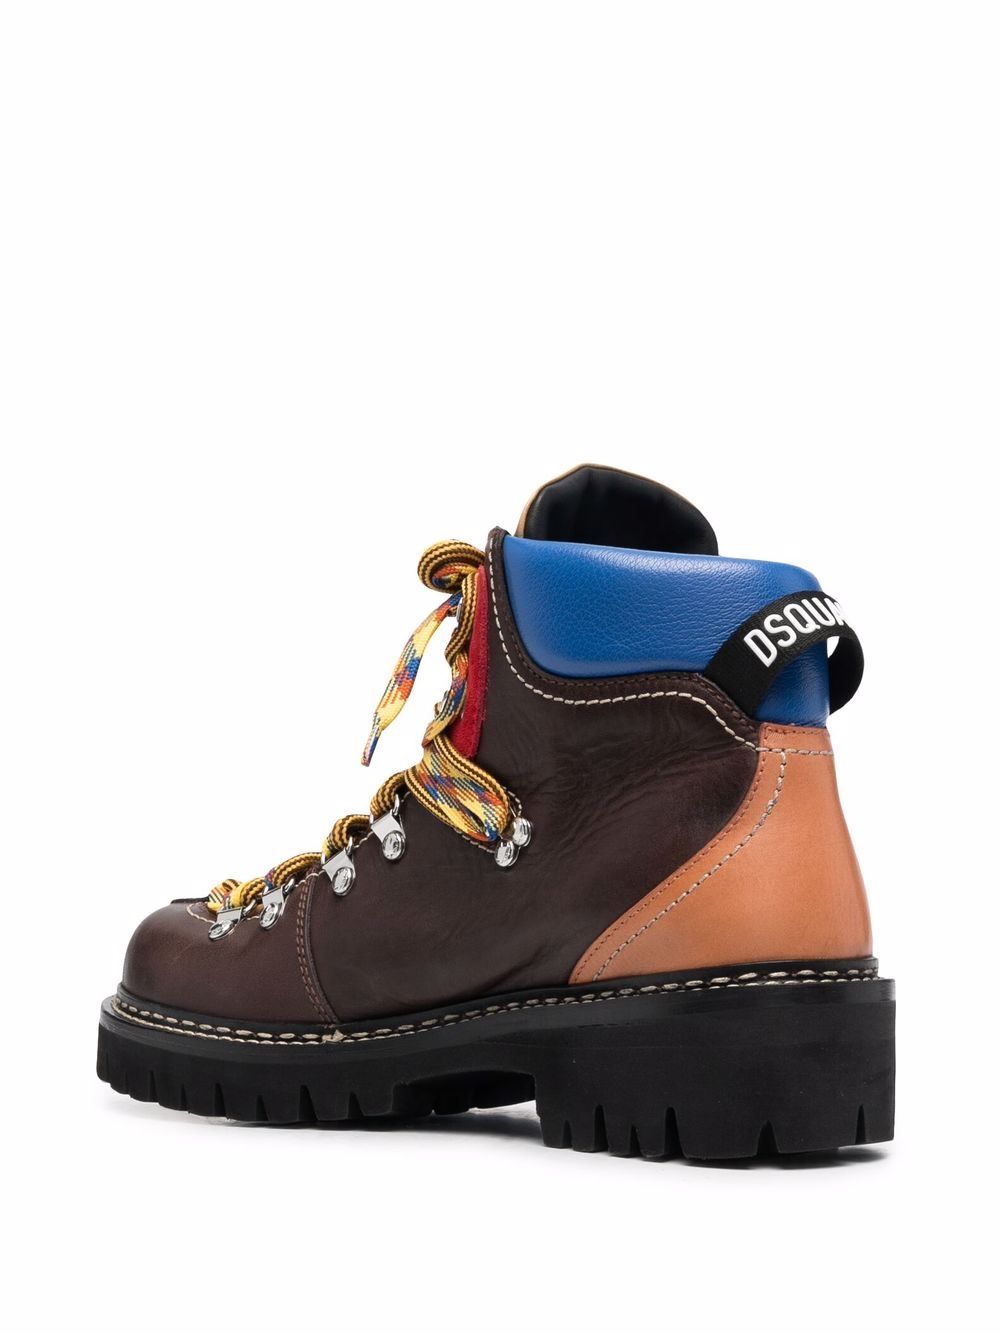 Dsquared2 Hiker Leather Boots - Farfetch